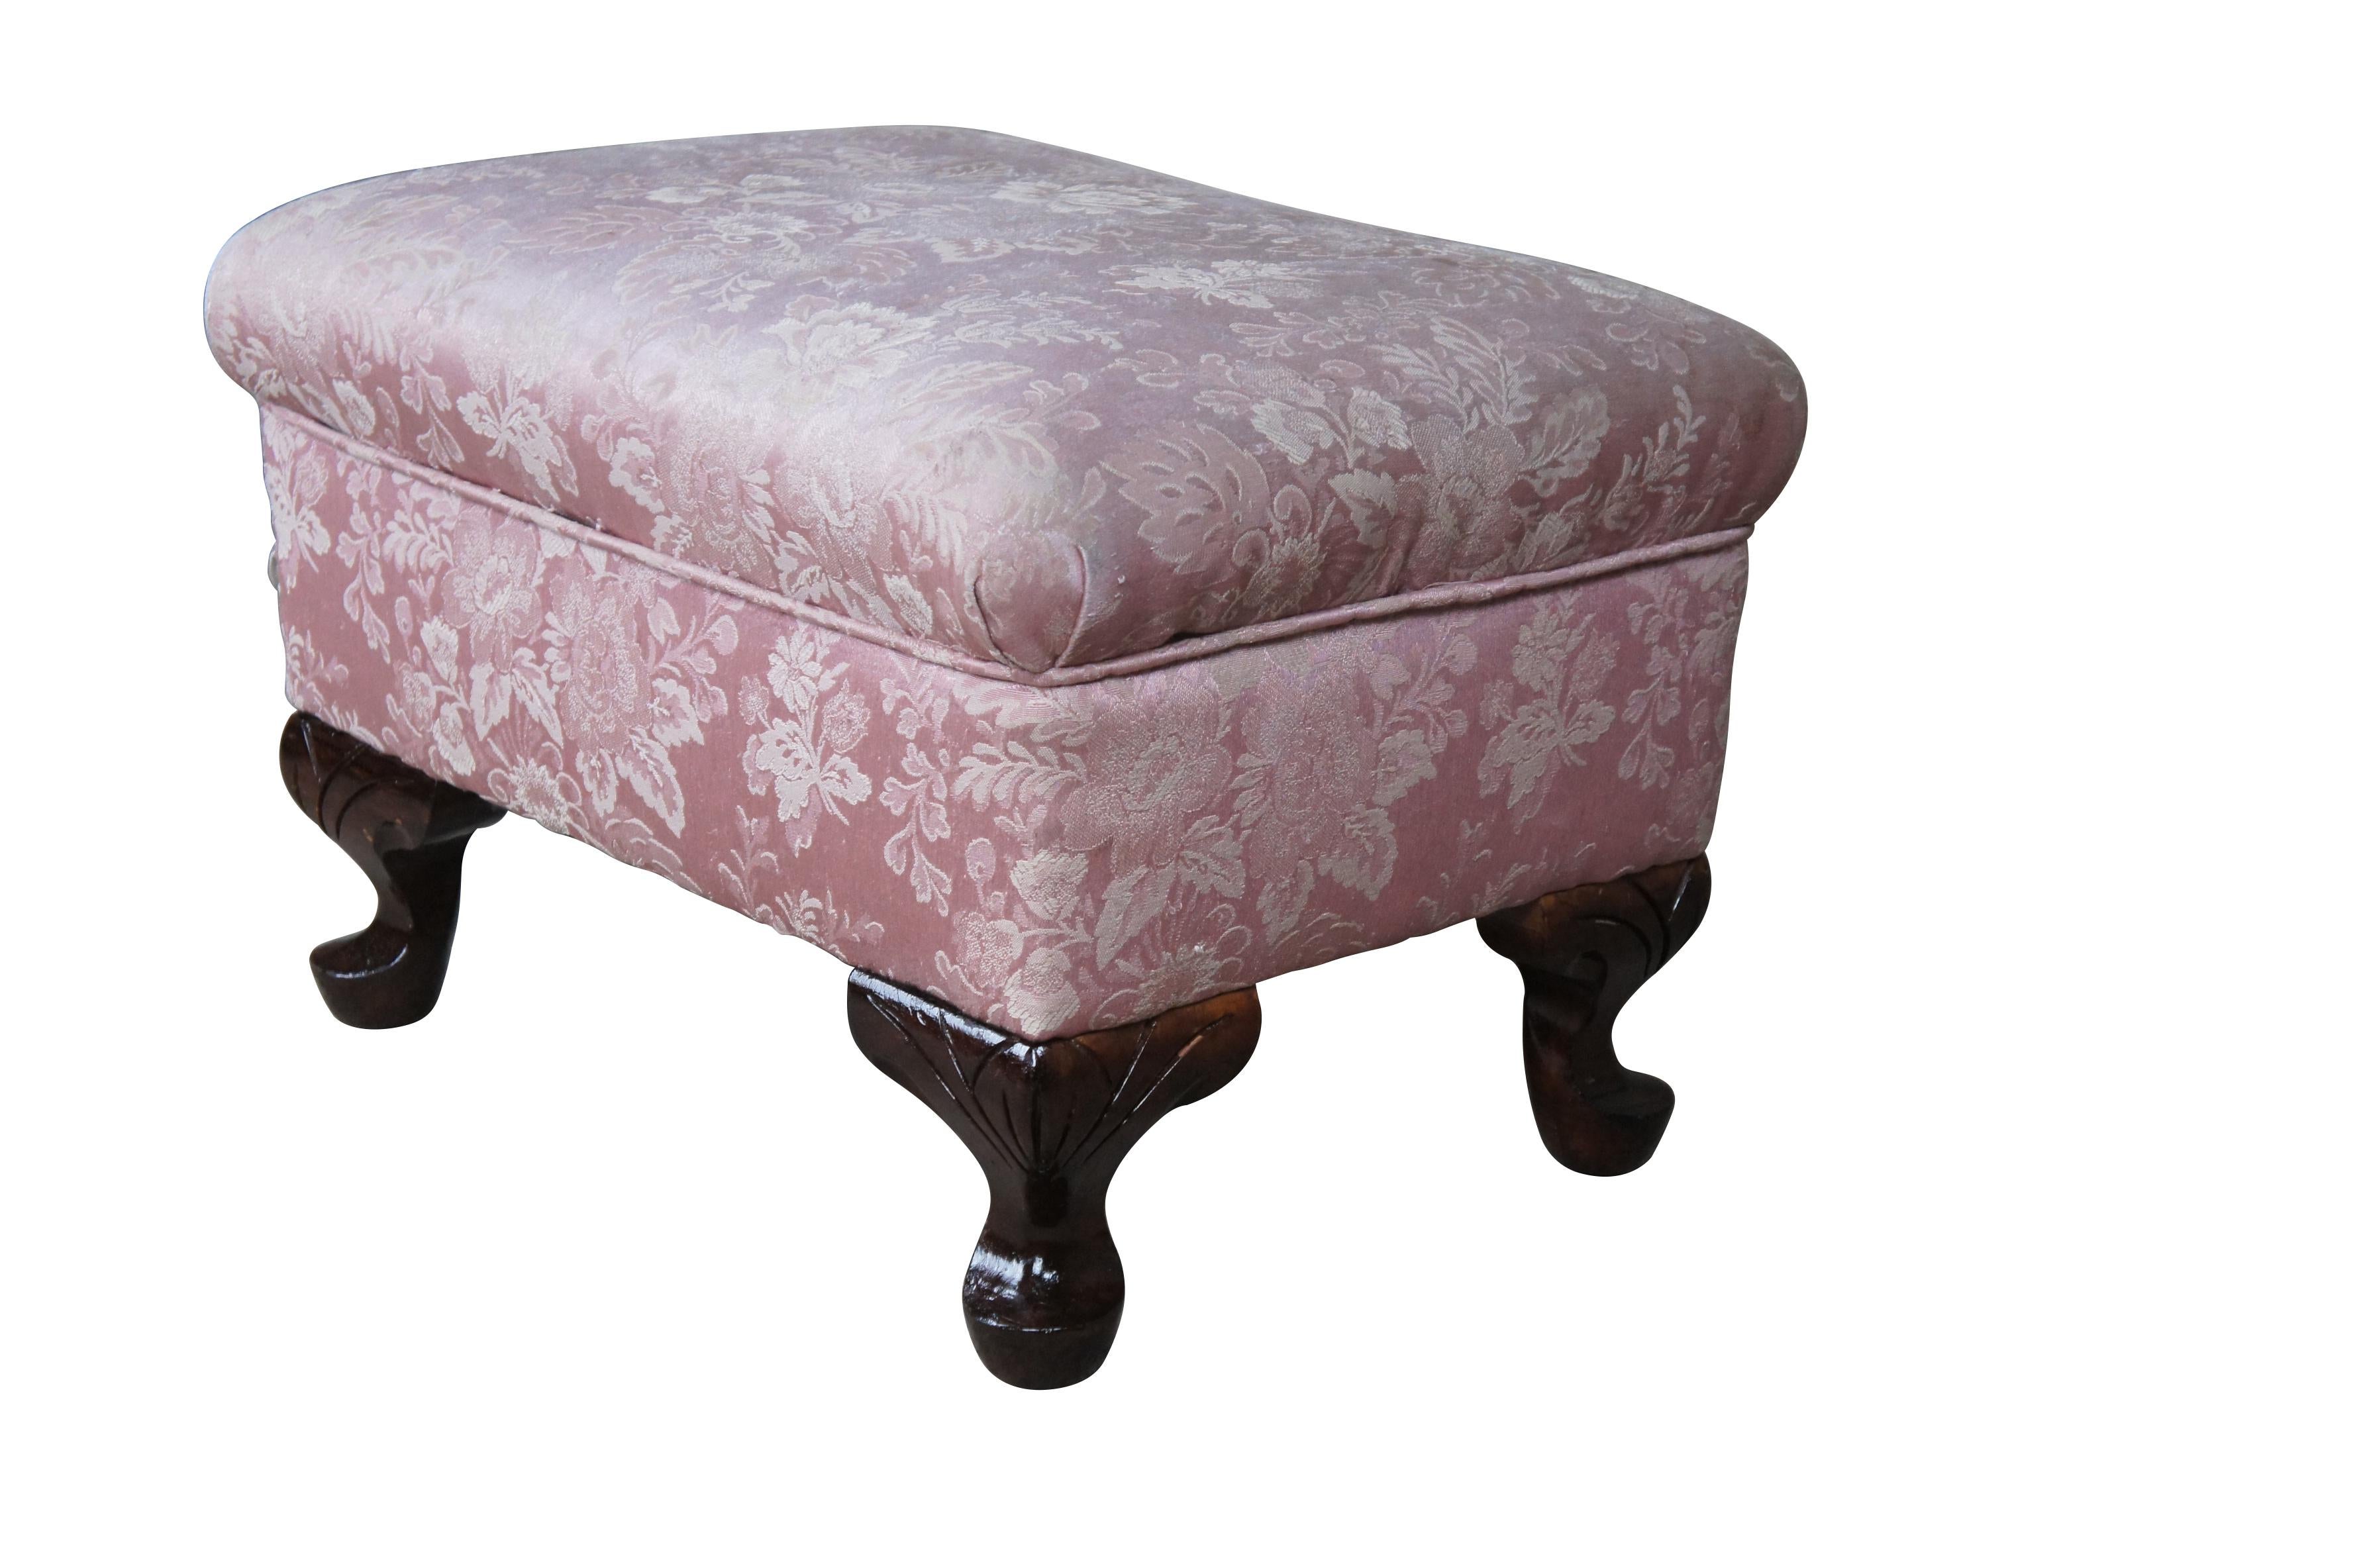 Vintage Queen Anne Floral Upholstered Walnut Ottoman Foot Stool Vanity Pouf Pink In Good Condition For Sale In Dayton, OH